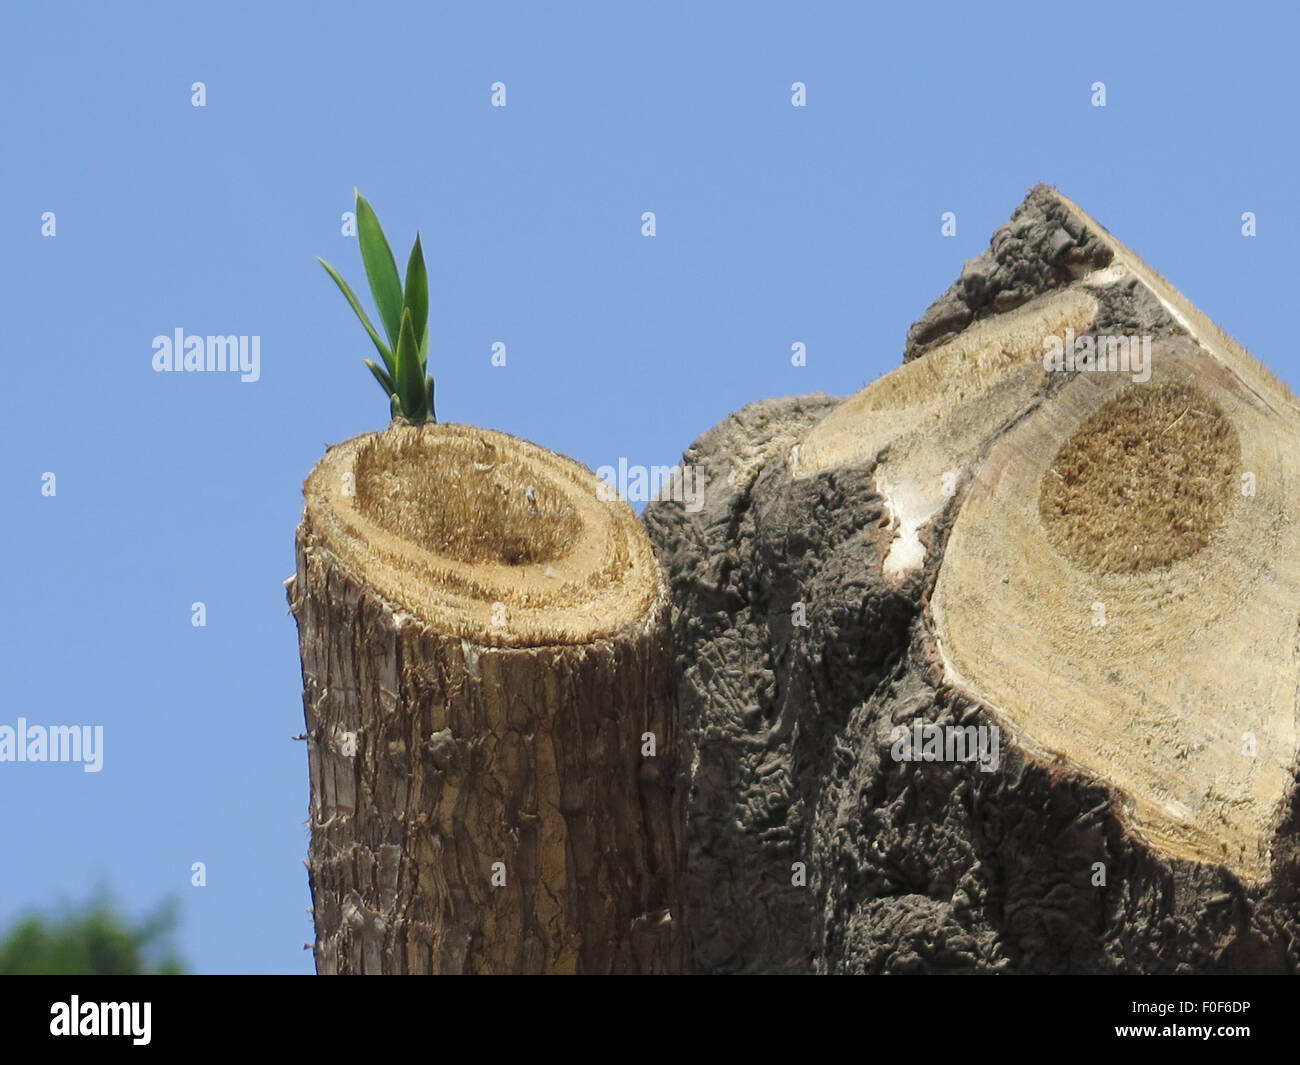 Fresh new shoot on pruned tree in Malaga town center, Spain Stock Photo